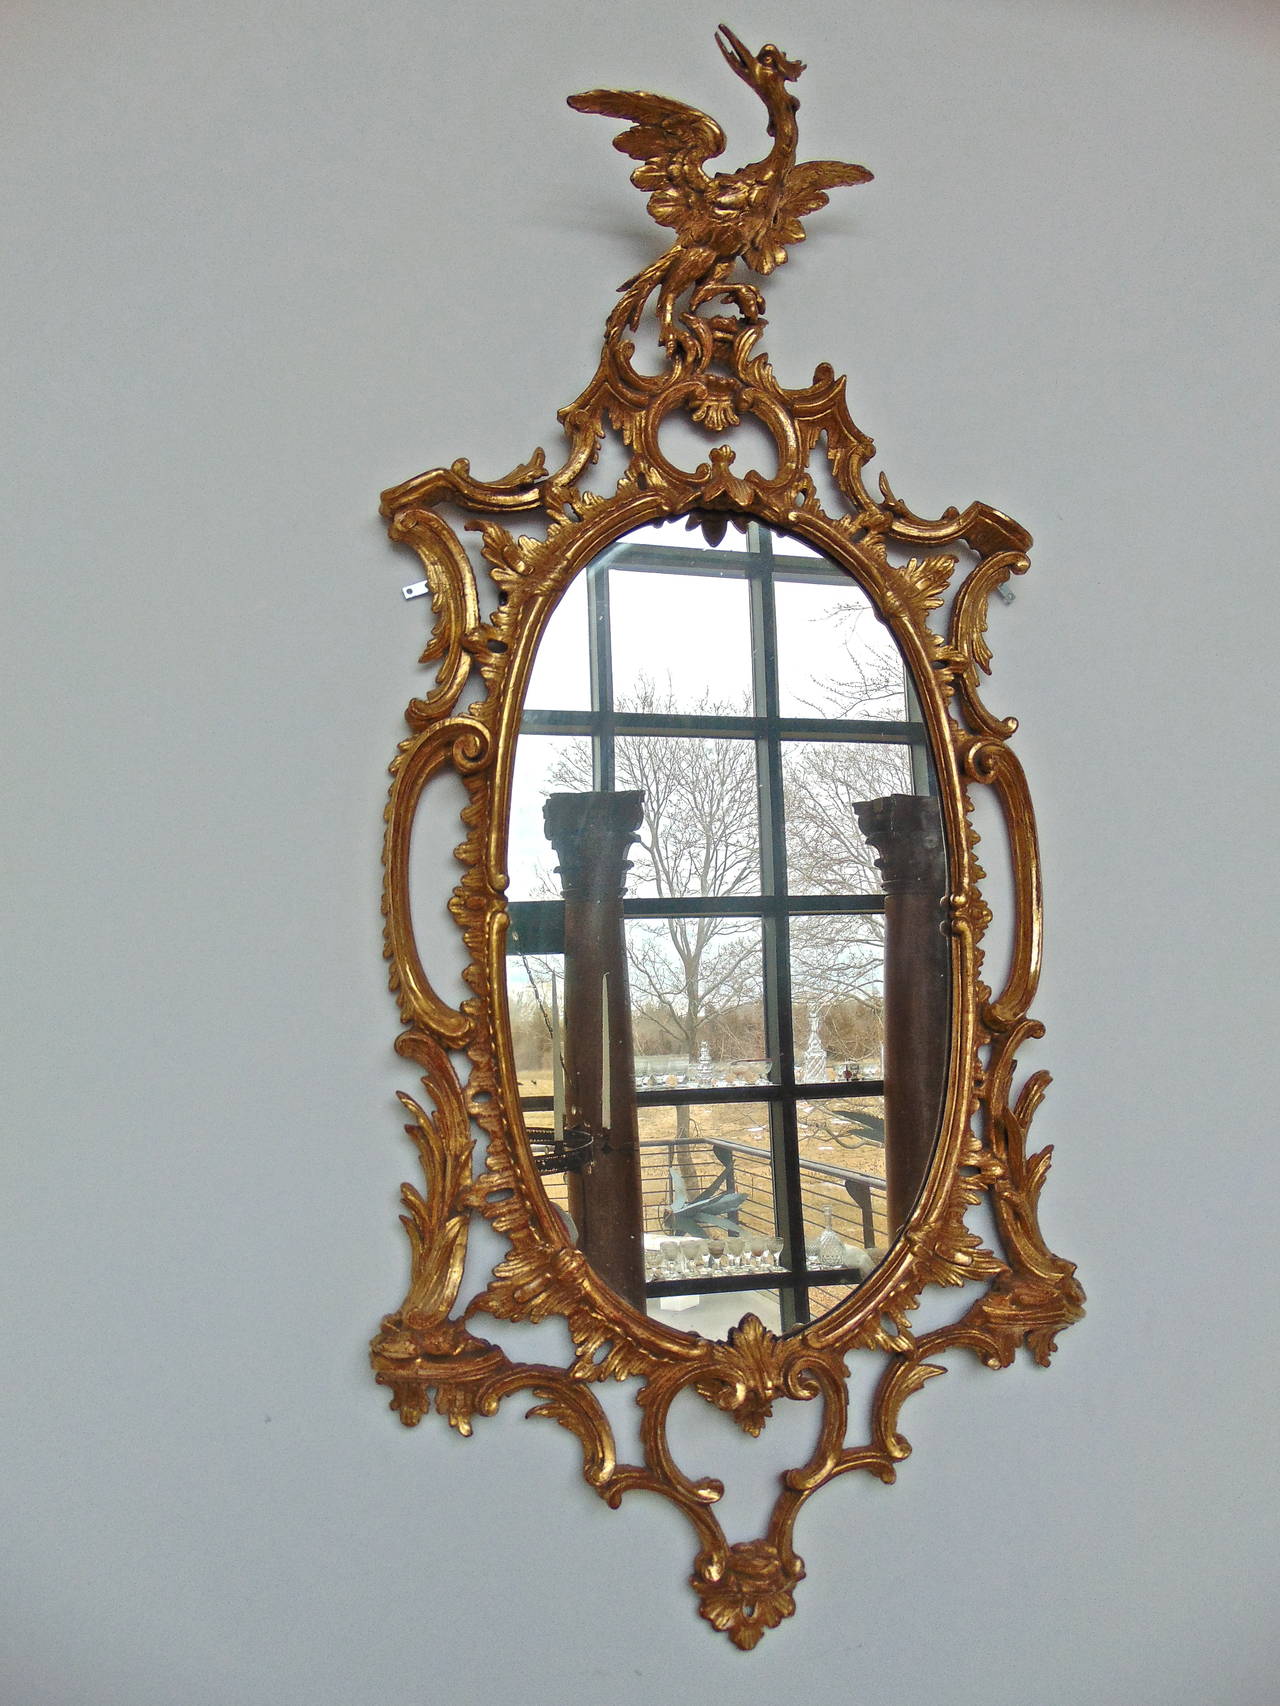 British Period 18th Century Chippendale, Carved and Gilt Mirror with Ho Ho Bird